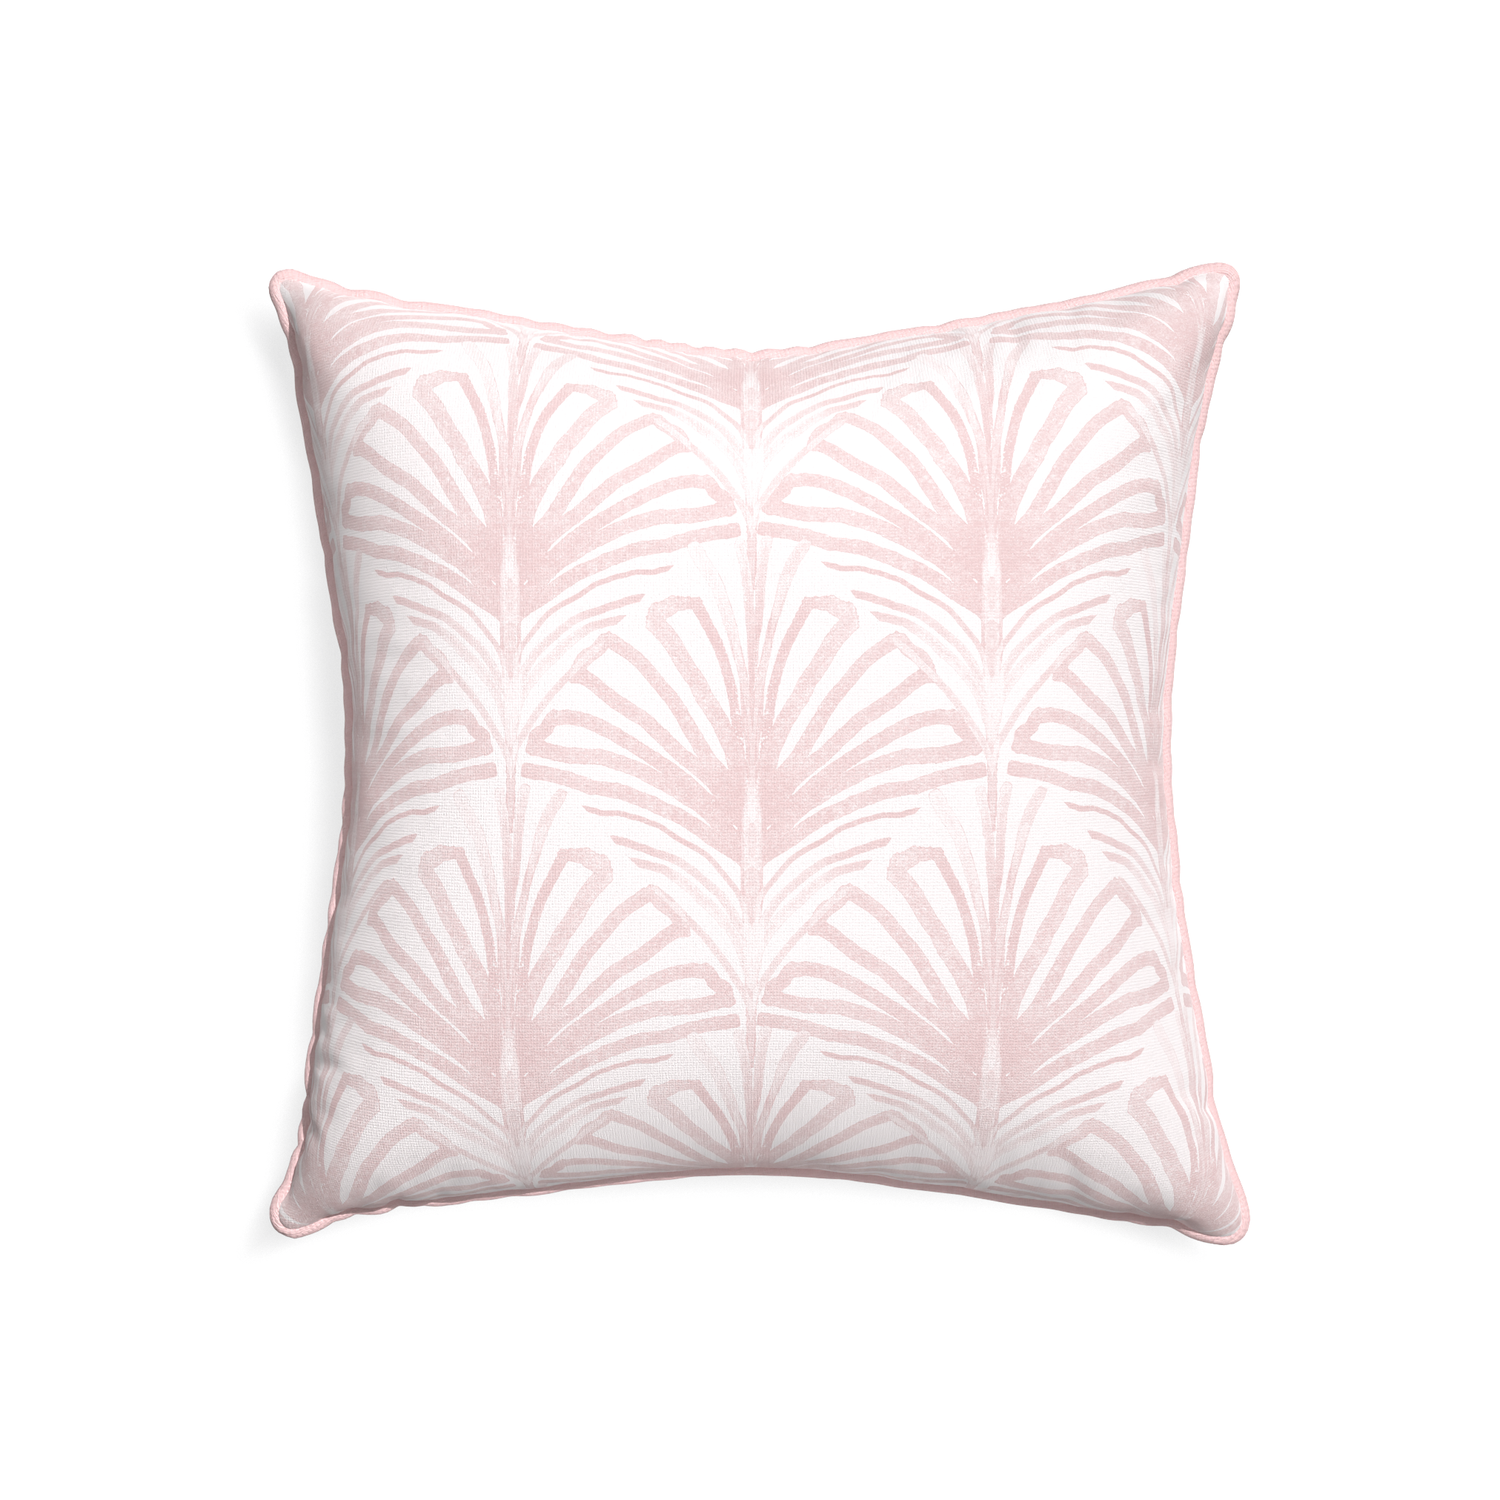 22-square suzy rose custom pillow with petal piping on white background